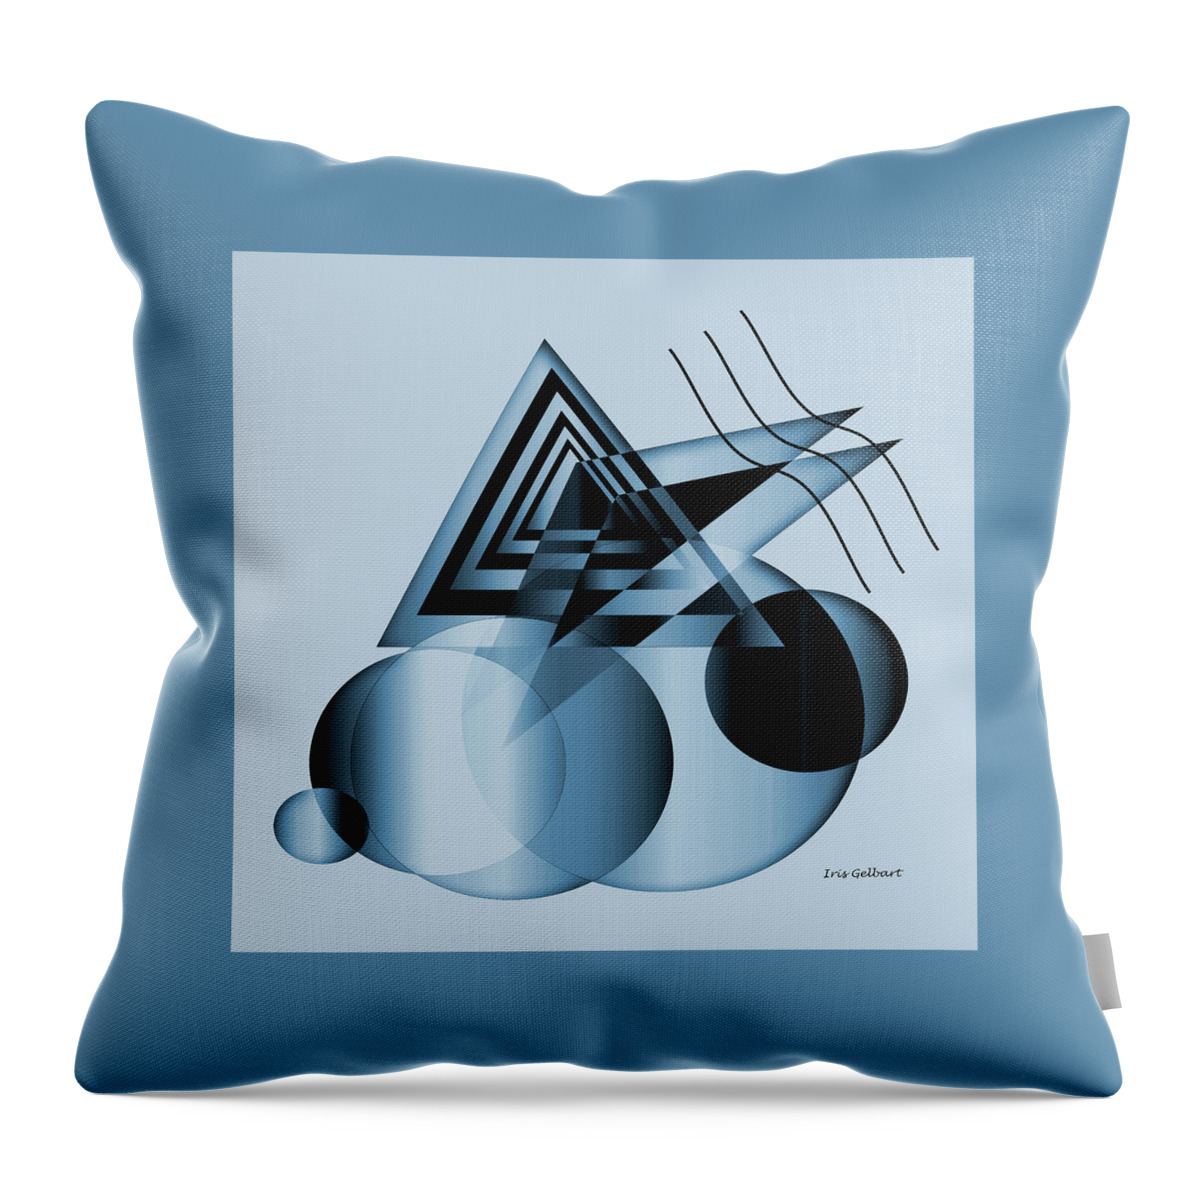 Abstract Throw Pillow featuring the digital art Abstract 1475 by Iris Gelbart